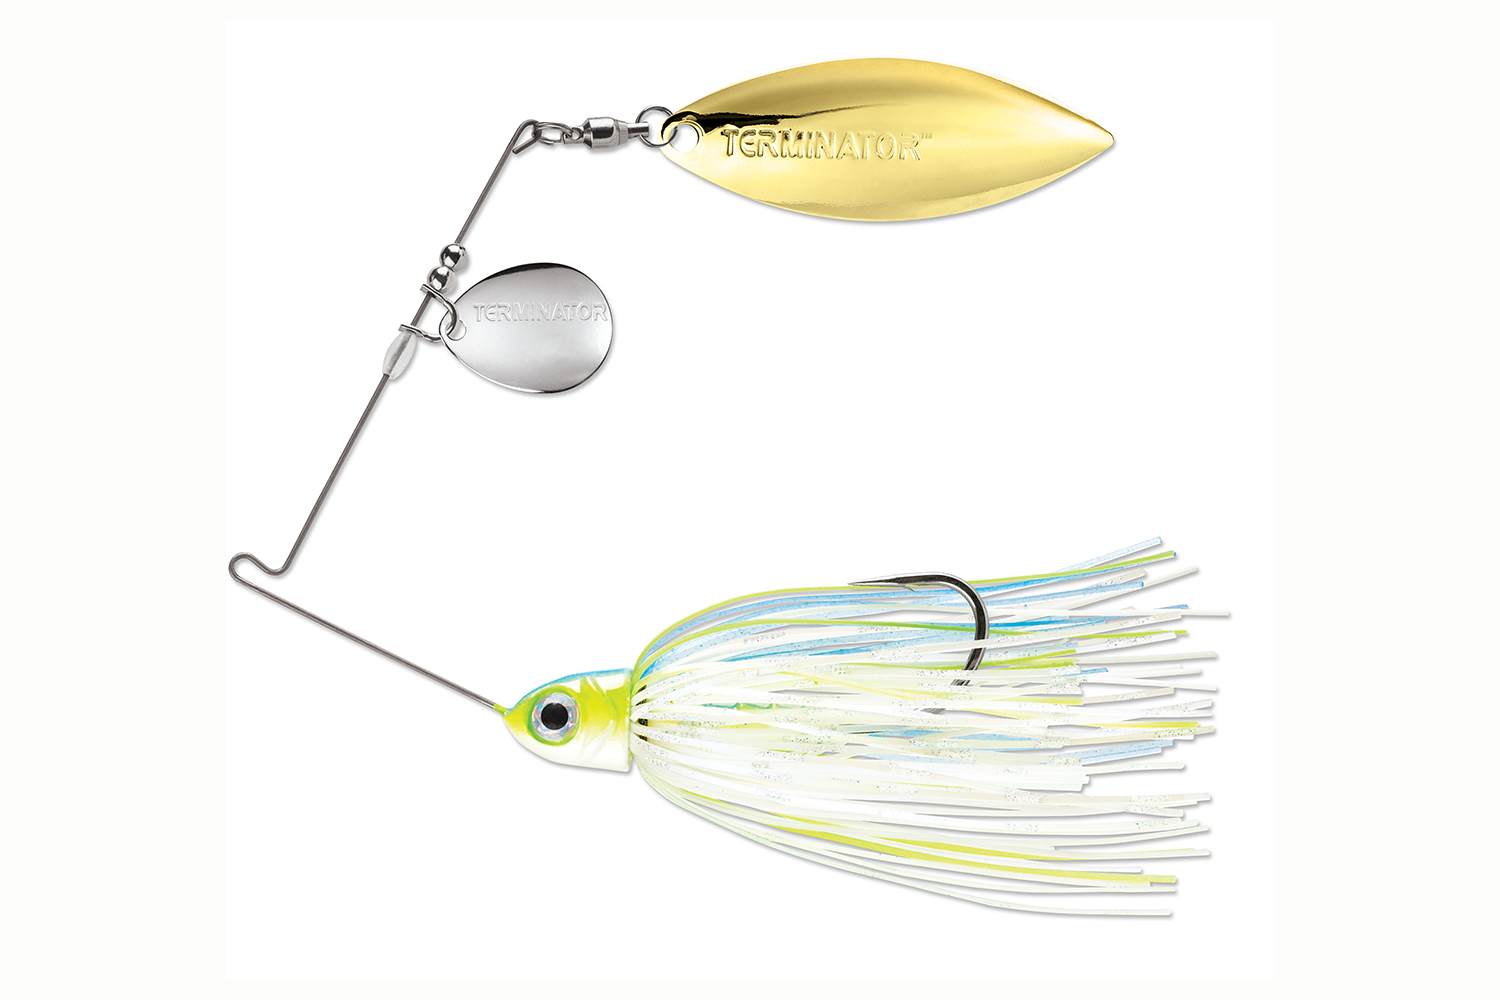 <p><b>Terminator Pro Series Spinnerbait</b></p>
<p>Designed hand-in-hand with 2019 Bassmaster Classic champ Ott DeFoe, the Pro Series Spinnerbaits use 17-7 stainless steel and the perfect ultra-fine wire that results in the perfect balance of strength and vibration. This lineup has a blade/color combination to match the conditions no matter when or where across the country. Thirty-one colors/blade combinations in 3/8 and 1/2-ounce models, custom hand tied skirts, oversized eye, tight grip trailer keeper and a premium VMC hook make this the finest spinnerbait ever made. </p>
<p><a href=